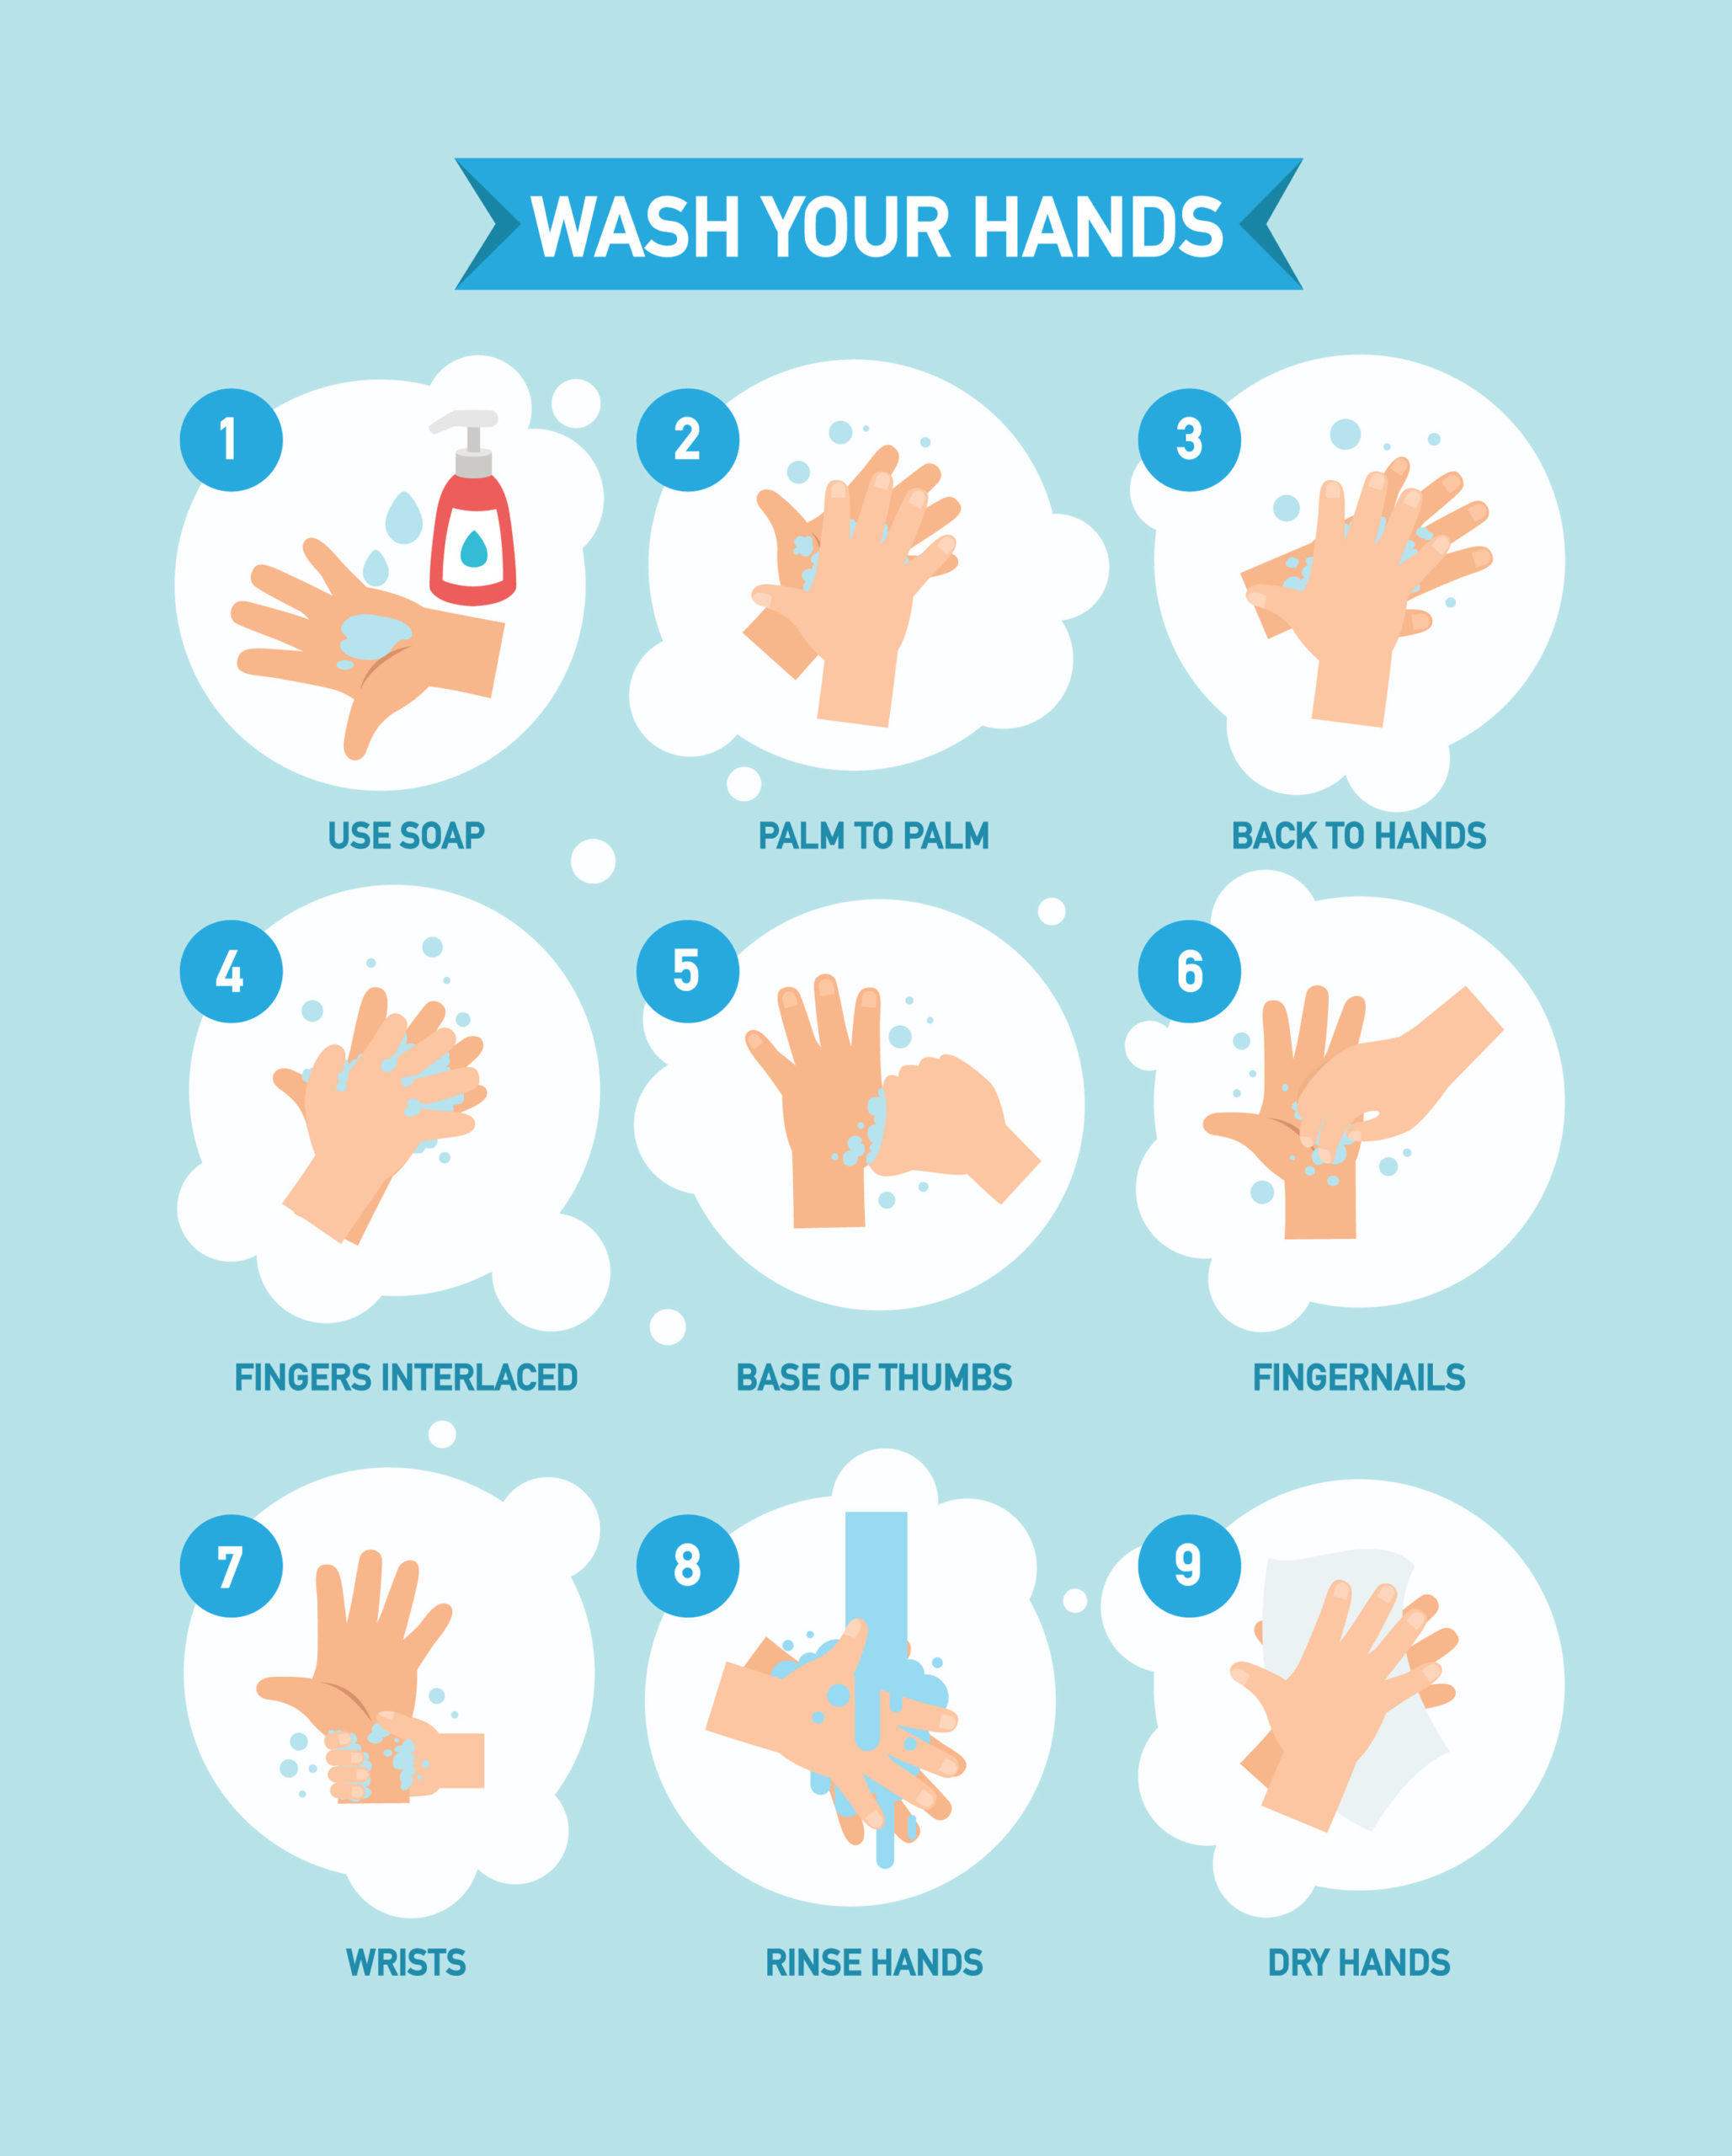 Graphic about how to wash your hands properly in 9 steps